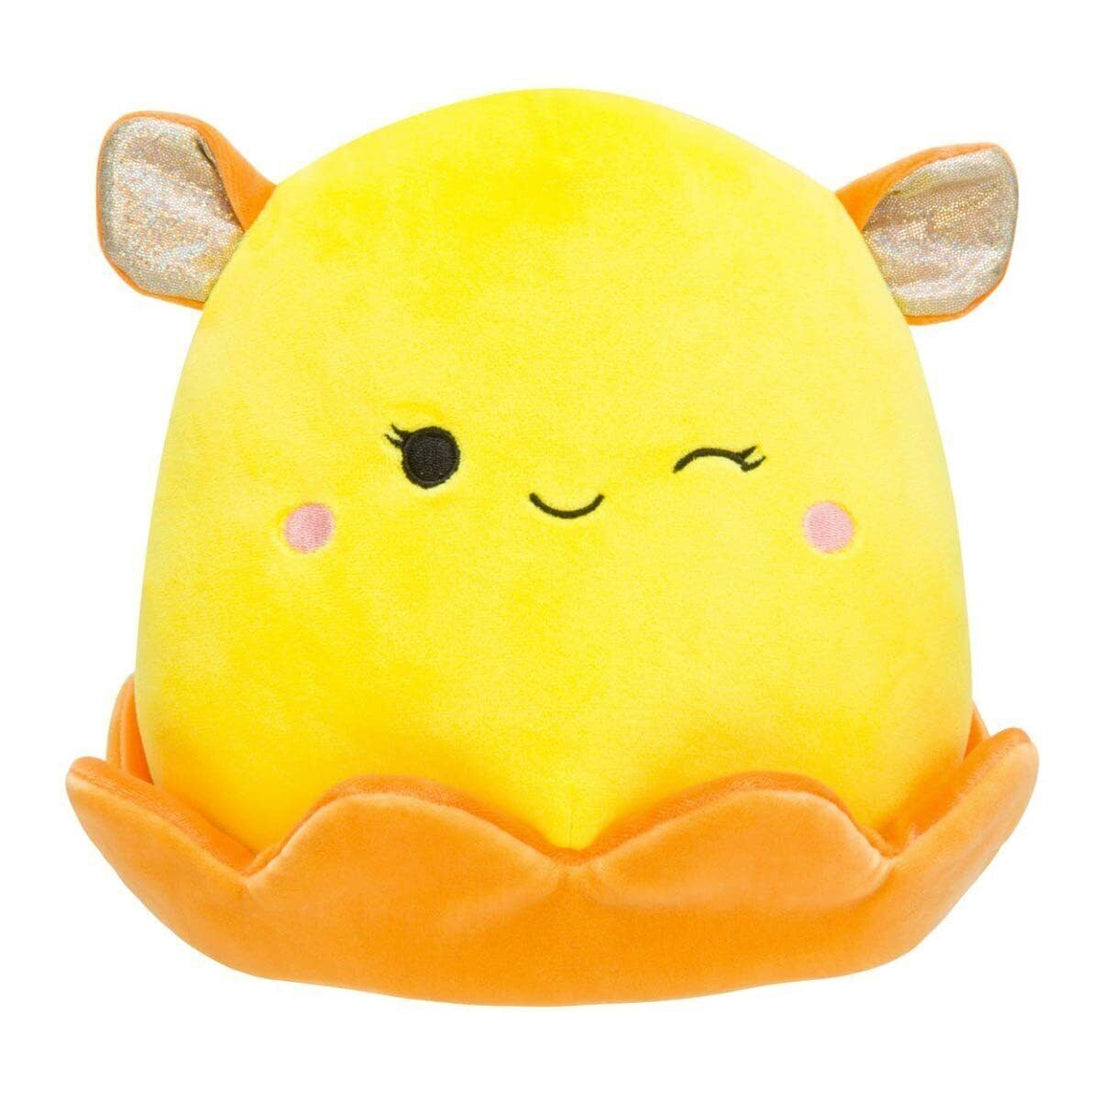 Squishmallows Squishmallow 7.5-Inch SOFT CUDDLE Toy Cute Animal Pillow Kid GIFT - BIJAN